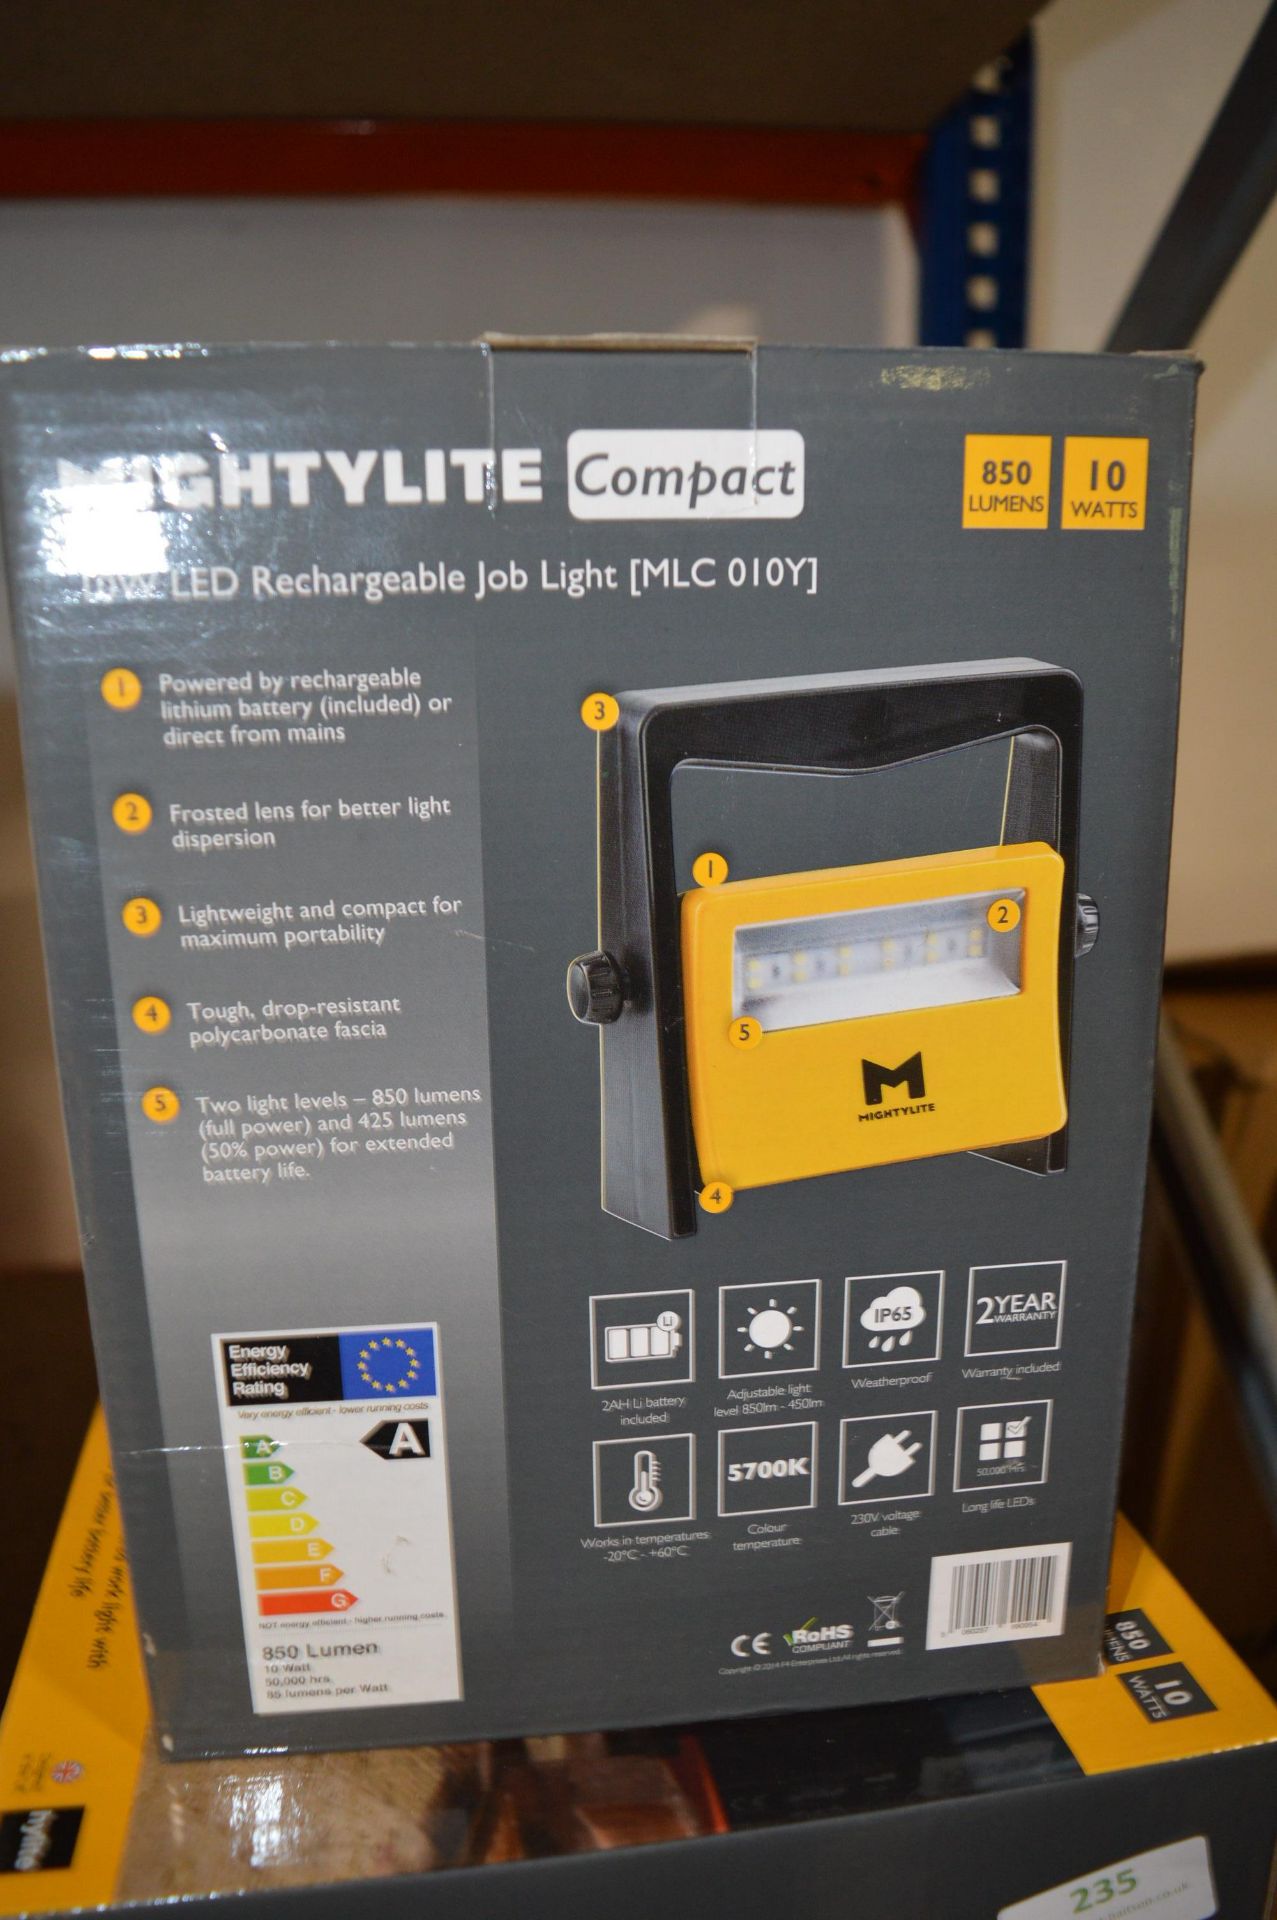 Mighty Light Compact LED Rechargeable Work Light - Bild 2 aus 2